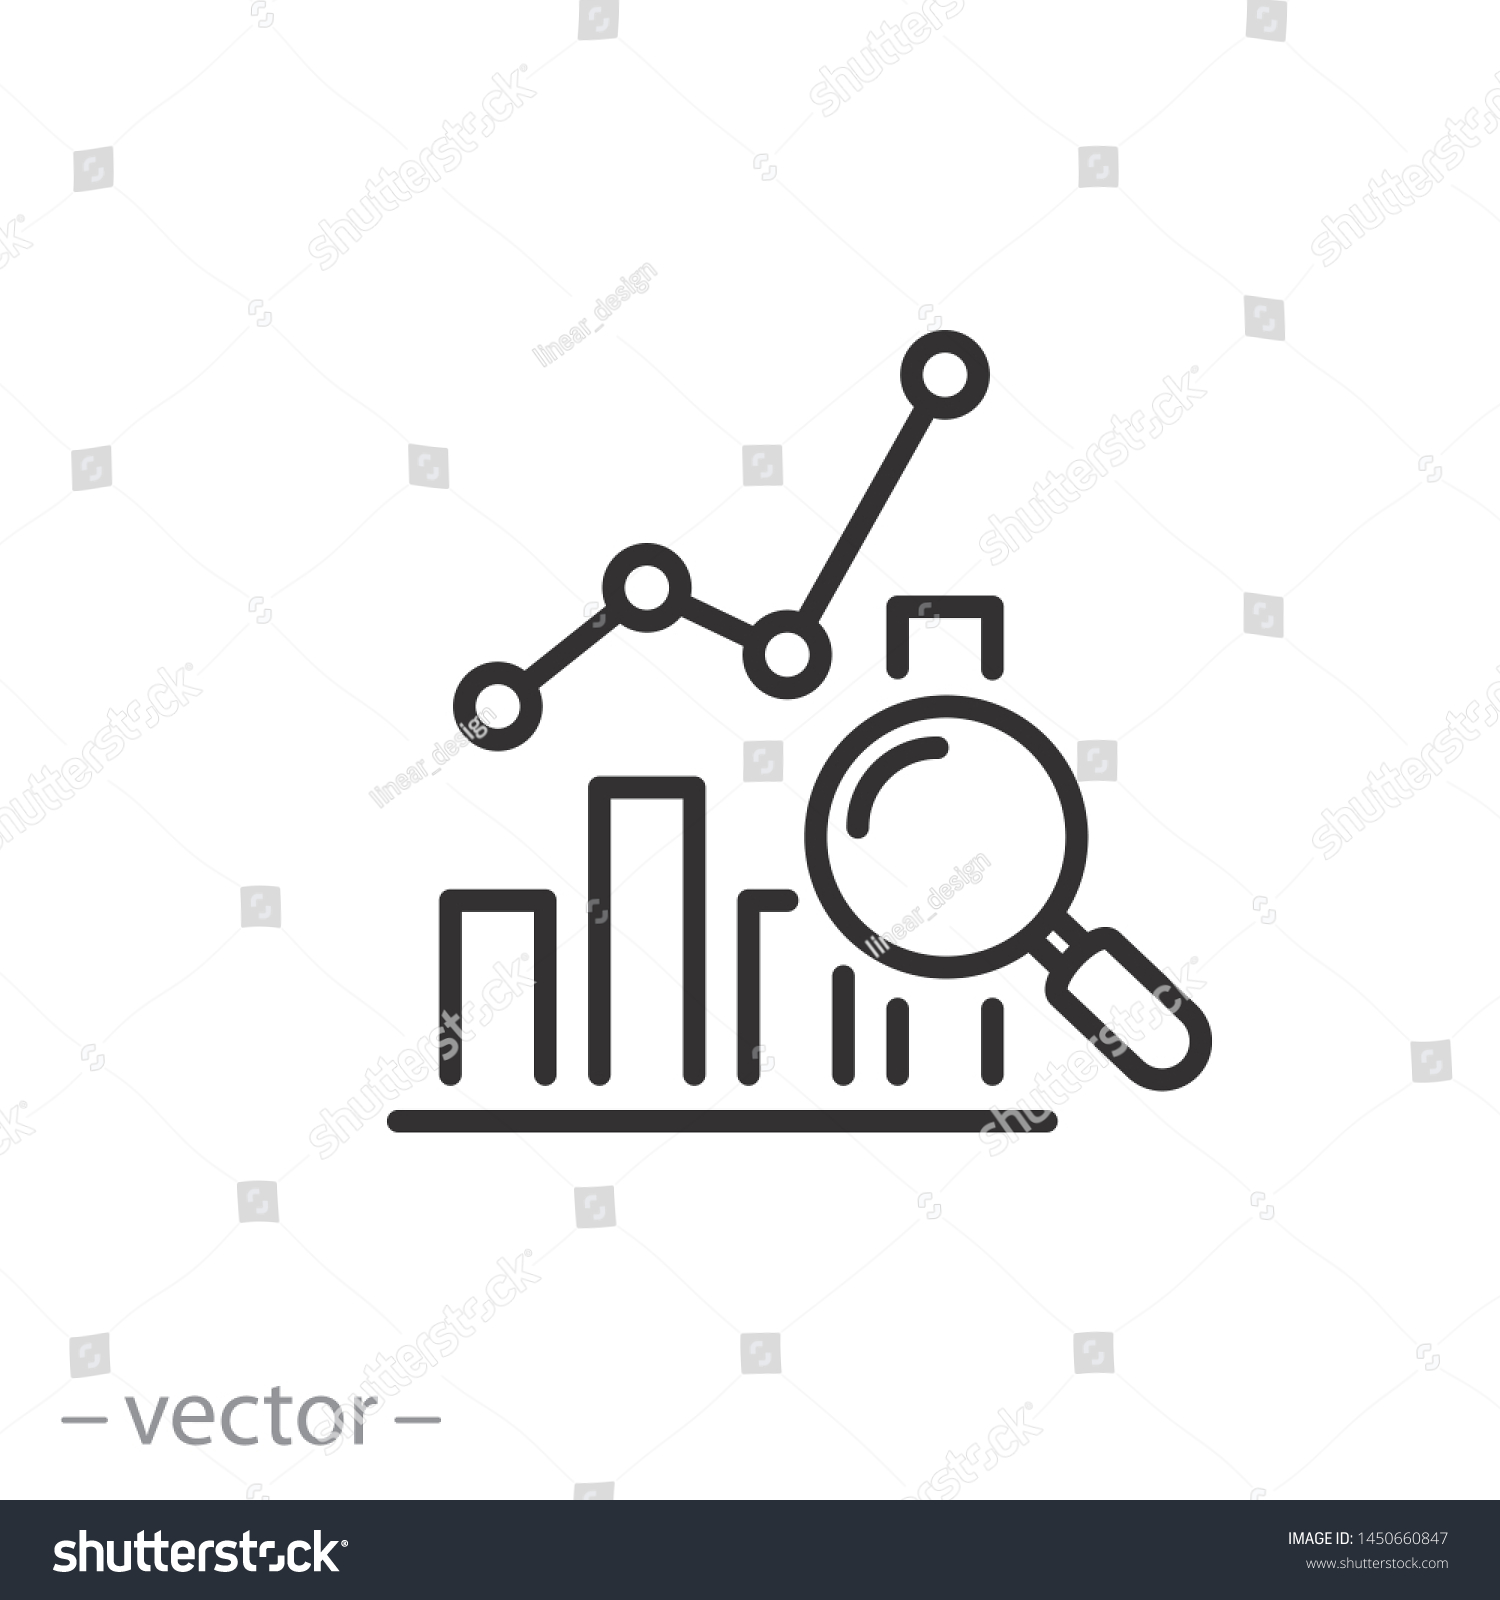 report icon, analytics data, research market thin line symbol for web and mobile phone on white background - editable stroke vector illustration #1450660847